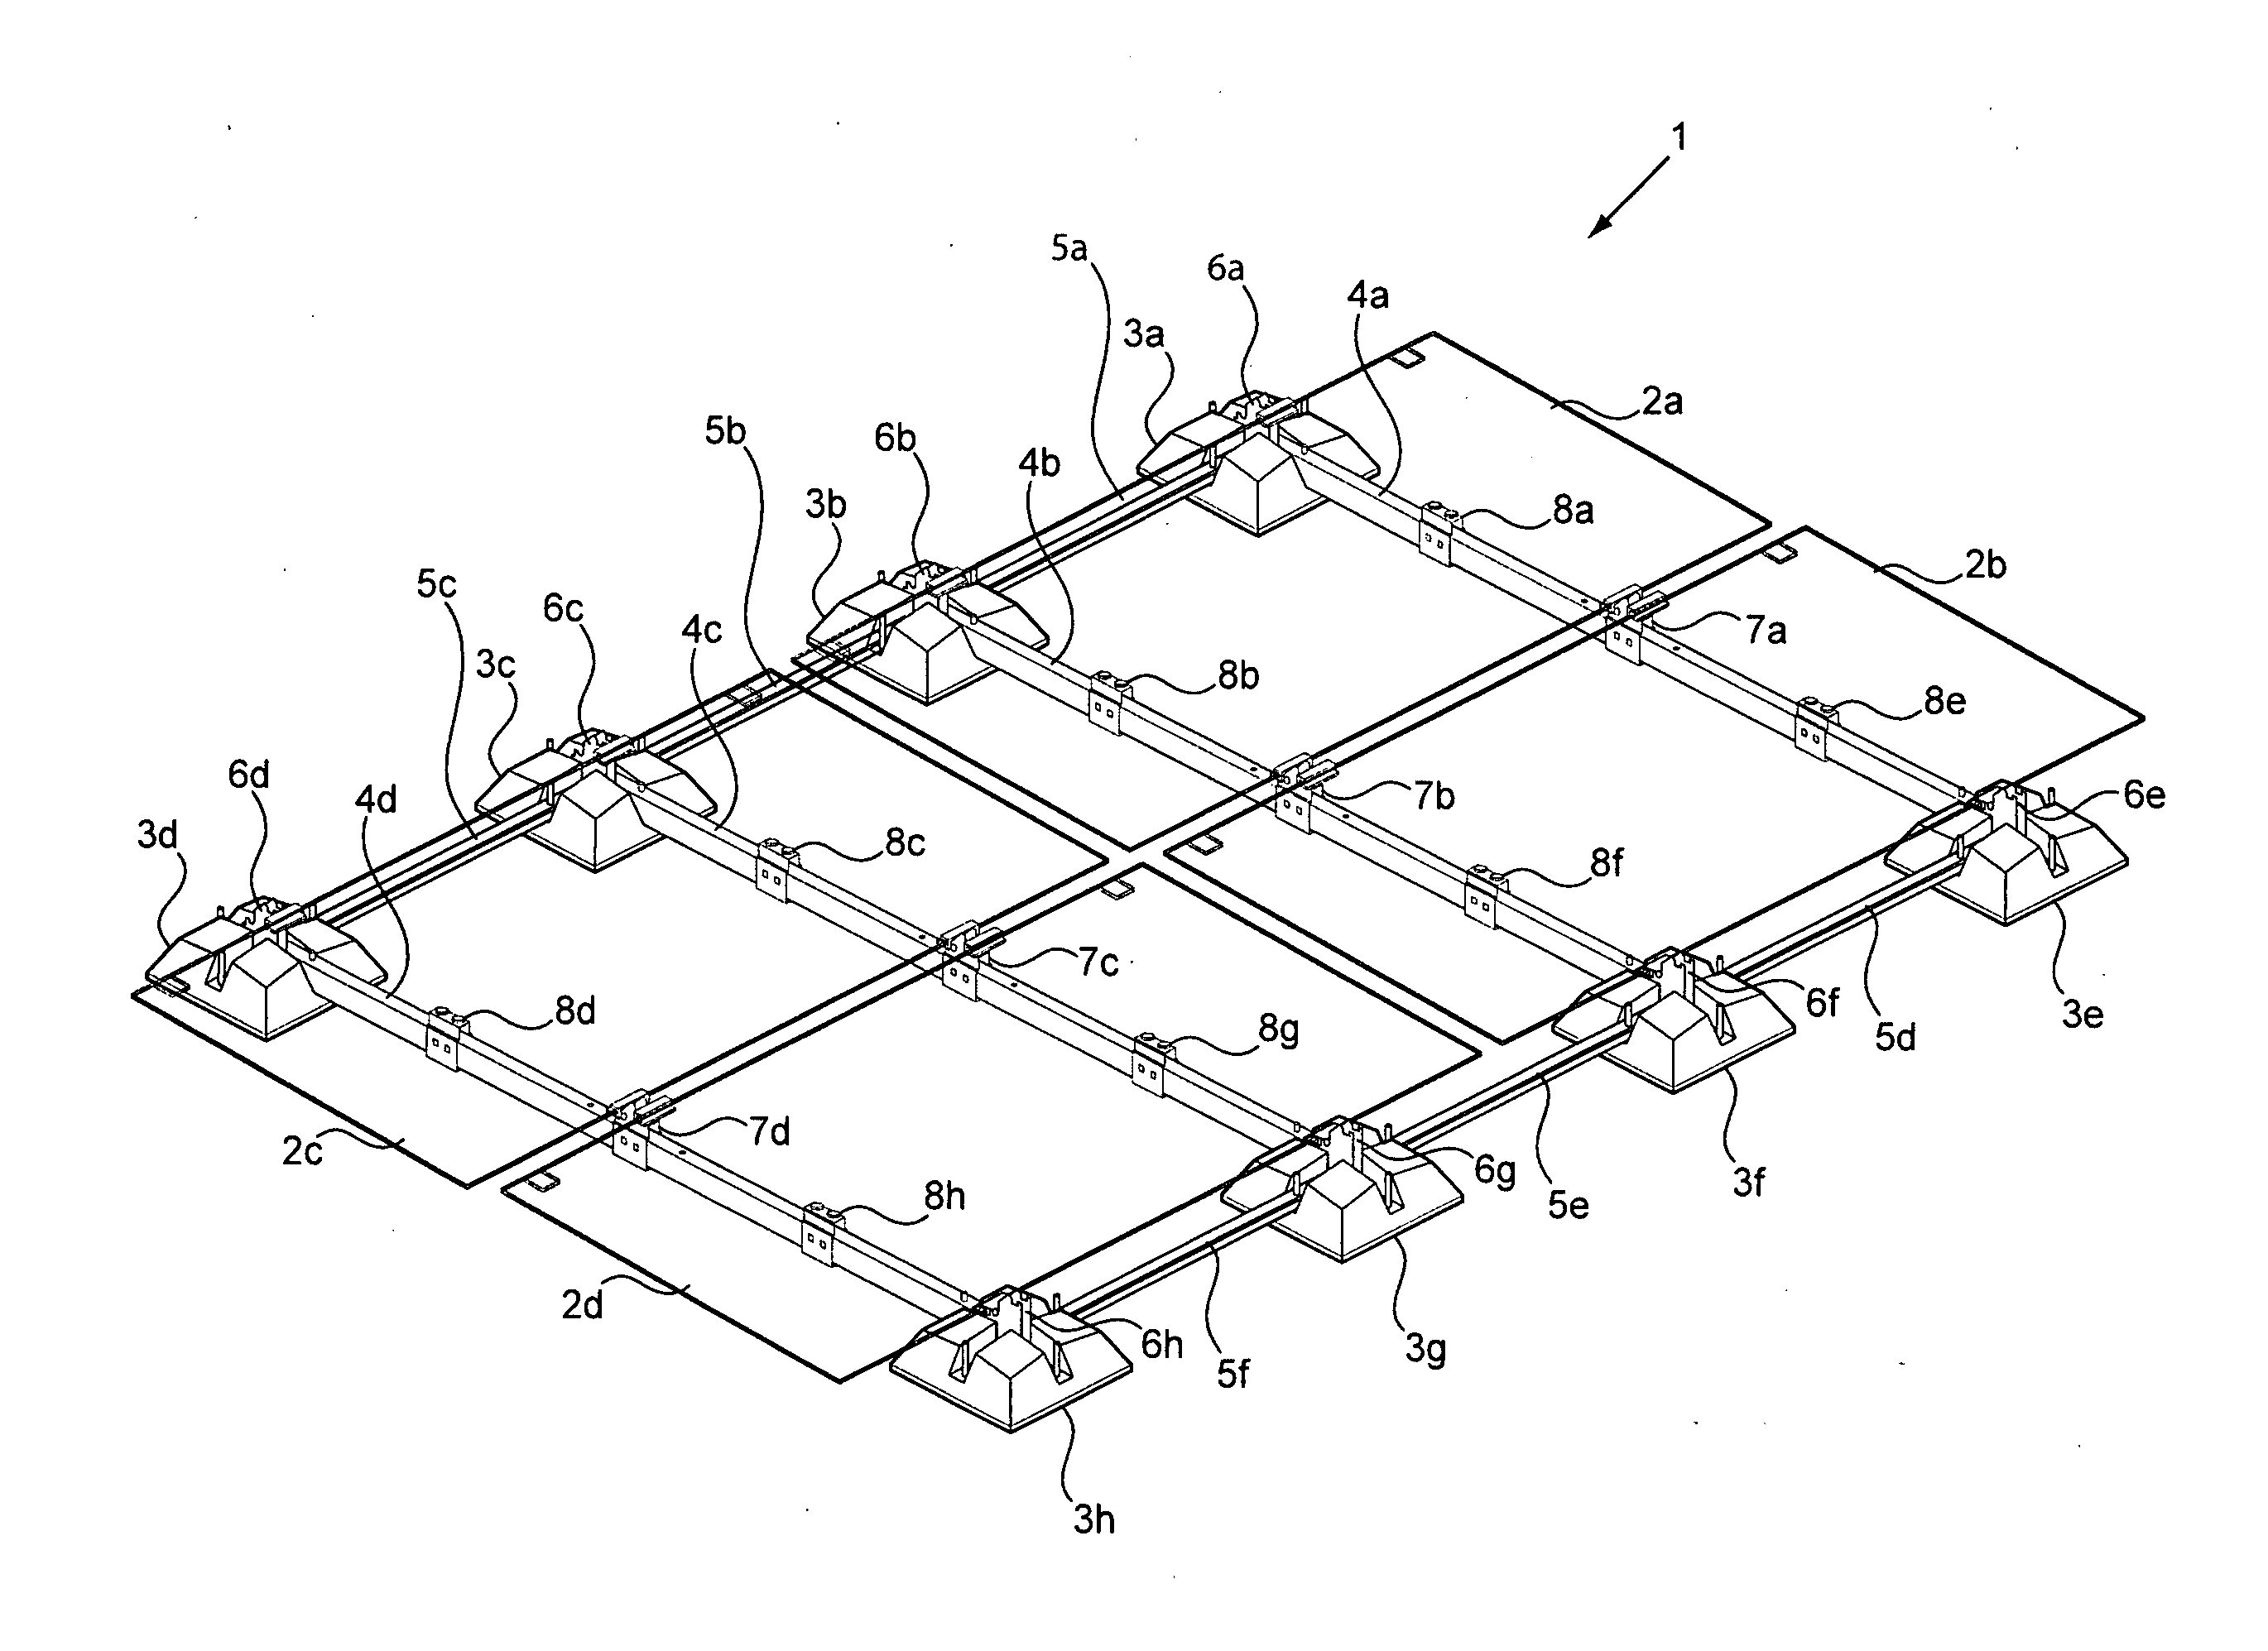 Photovoltaic panel clamp